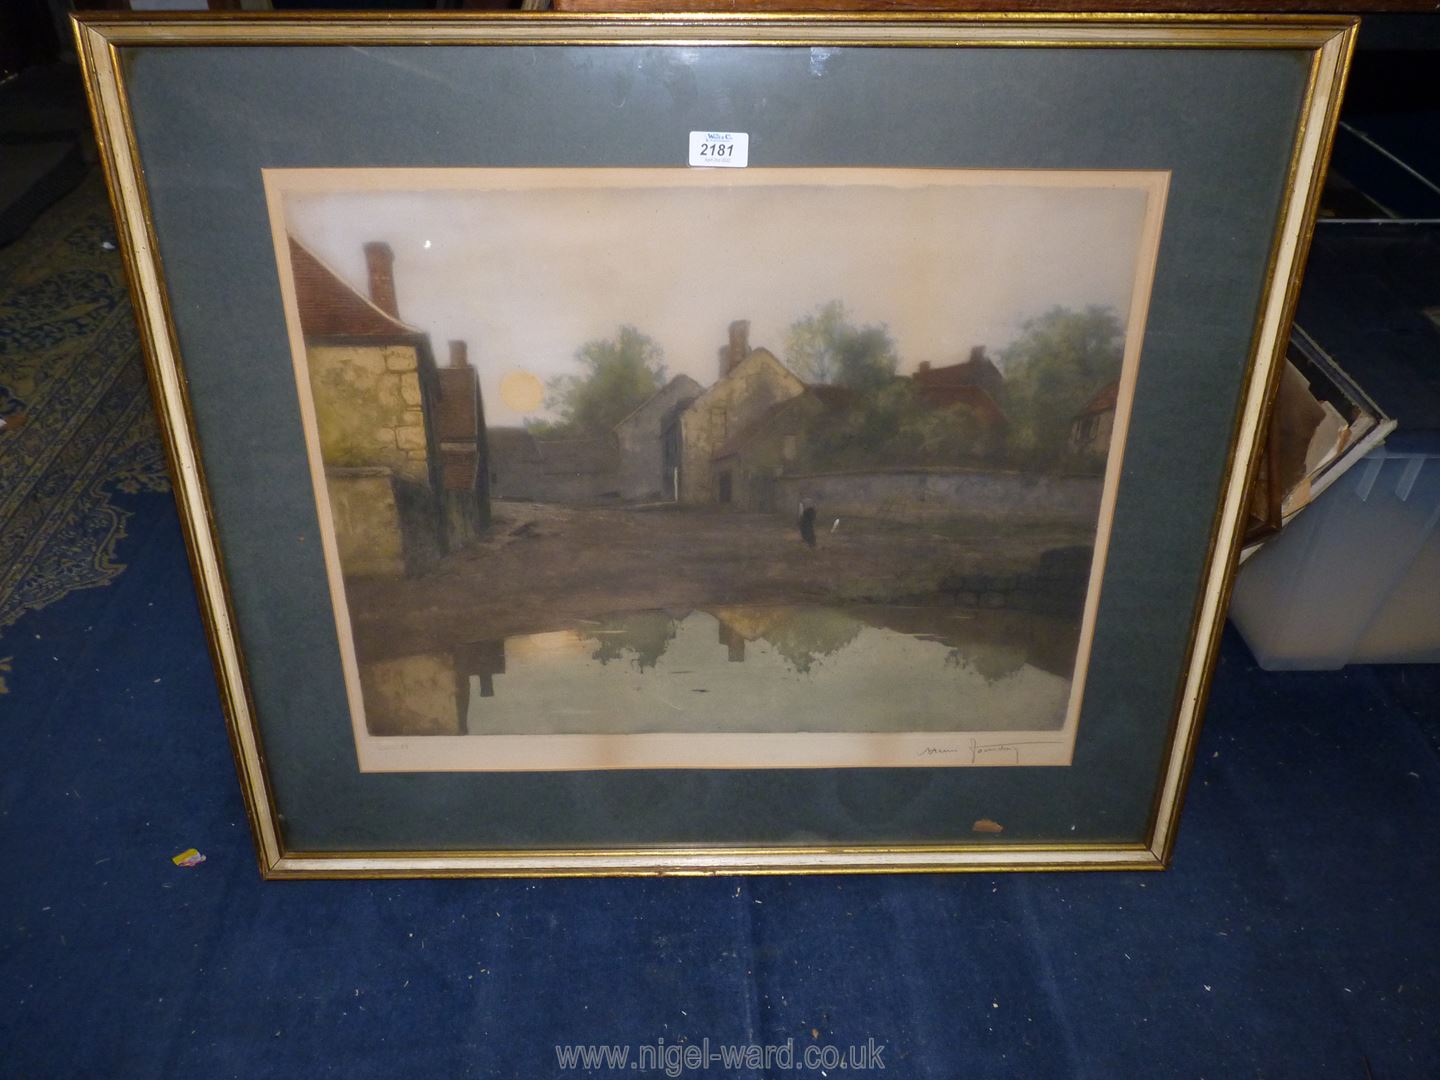 A framed and mounted lithograph of a gentleman walking through a farmyard at dusk,